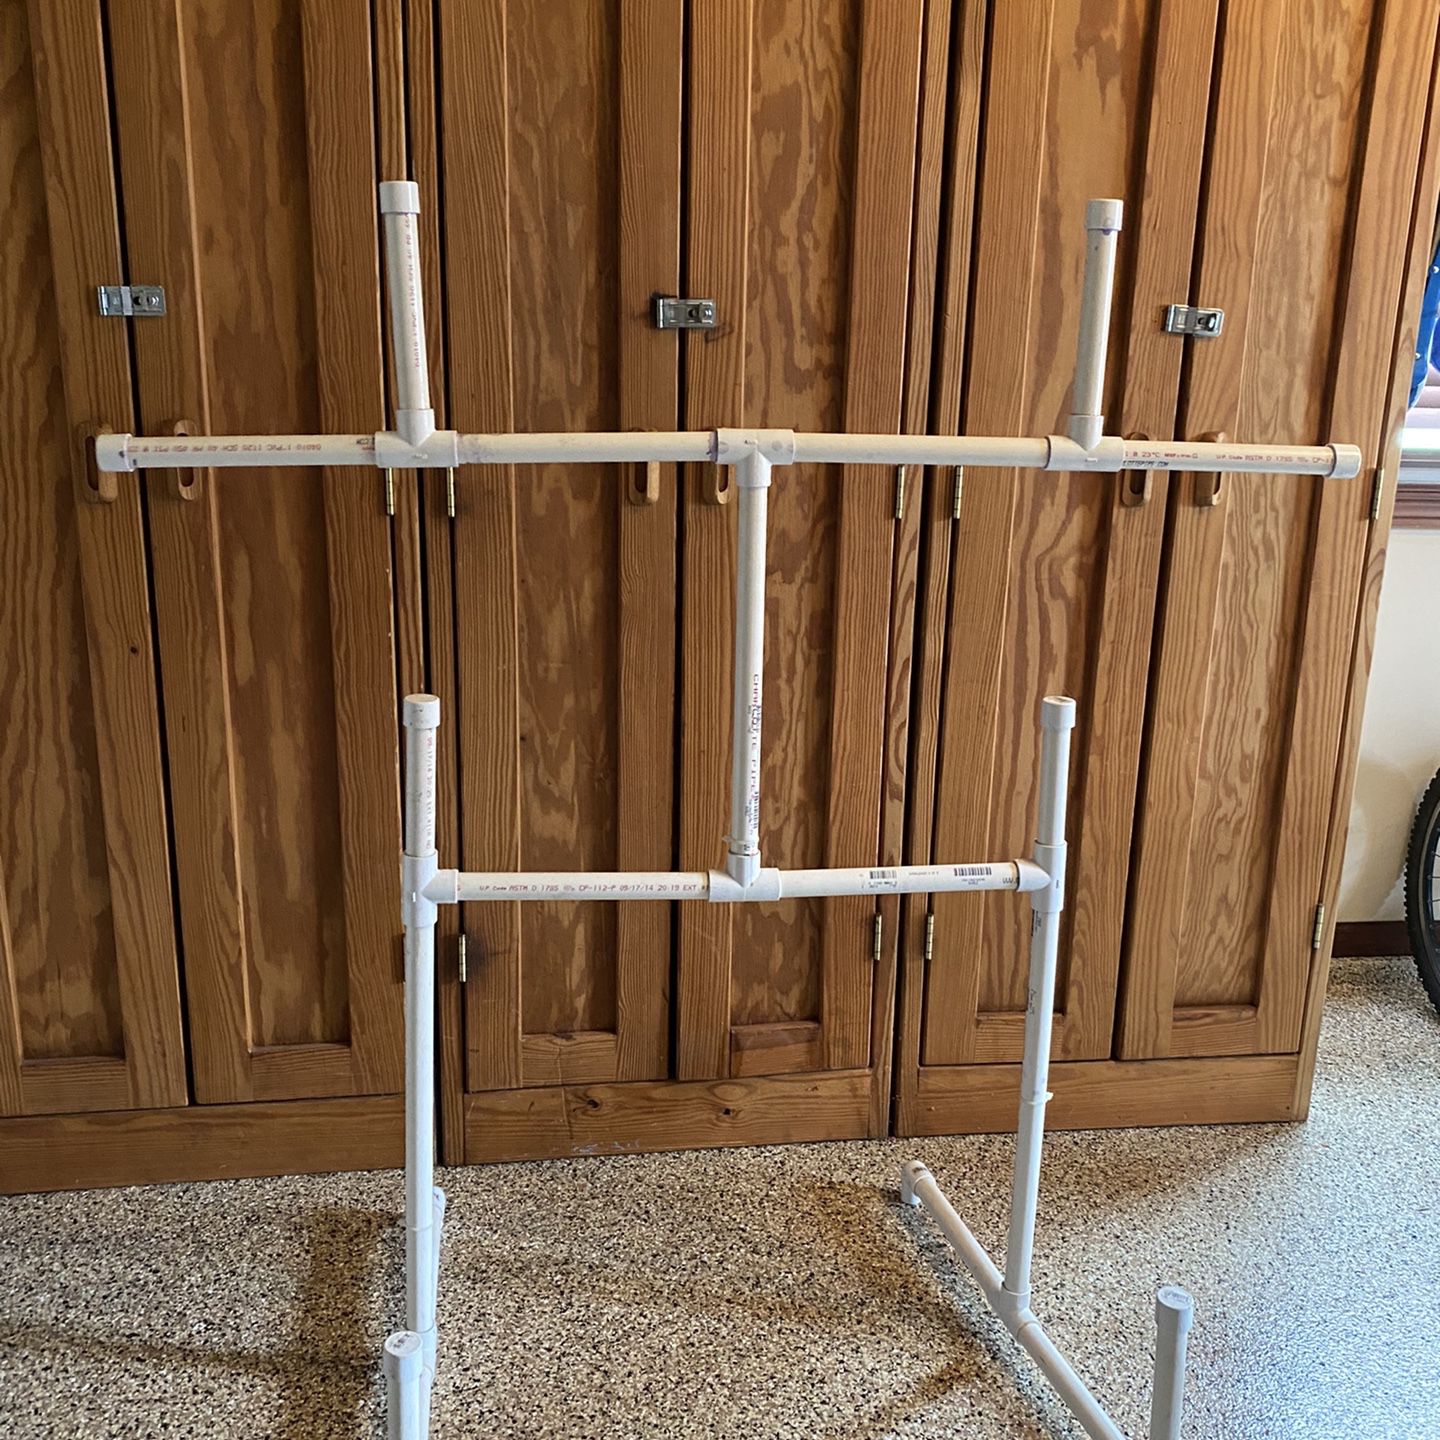 DIY Drying Rack for Hockey Gear made with PVC Pipe - The Hockey Kids